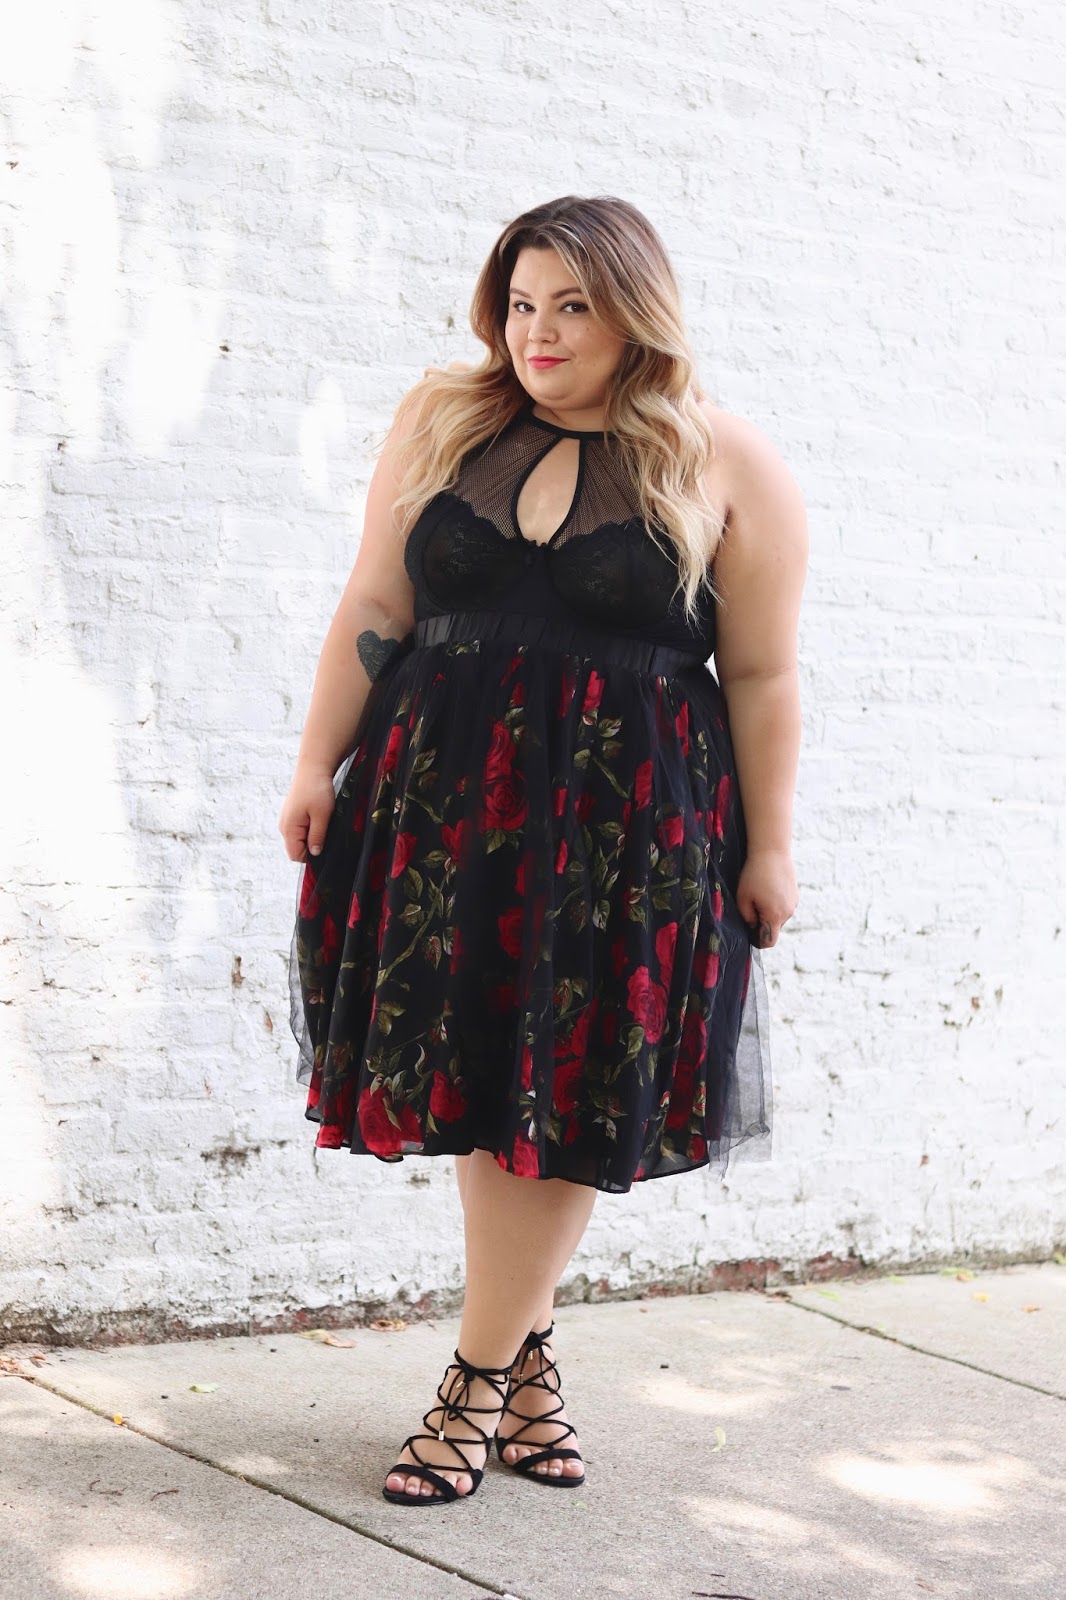 natalie craig, natalie in the city, Chicago blogger, plus size fashion blogger, society plus, plus size tutus, carrie Bradshaw tutu, sex and the city, date night outfit, plus size dating, society +, affordable plus size fashion, midwest blogger, how to wear florals, curves and confidence, military style jacket, plus size clothing